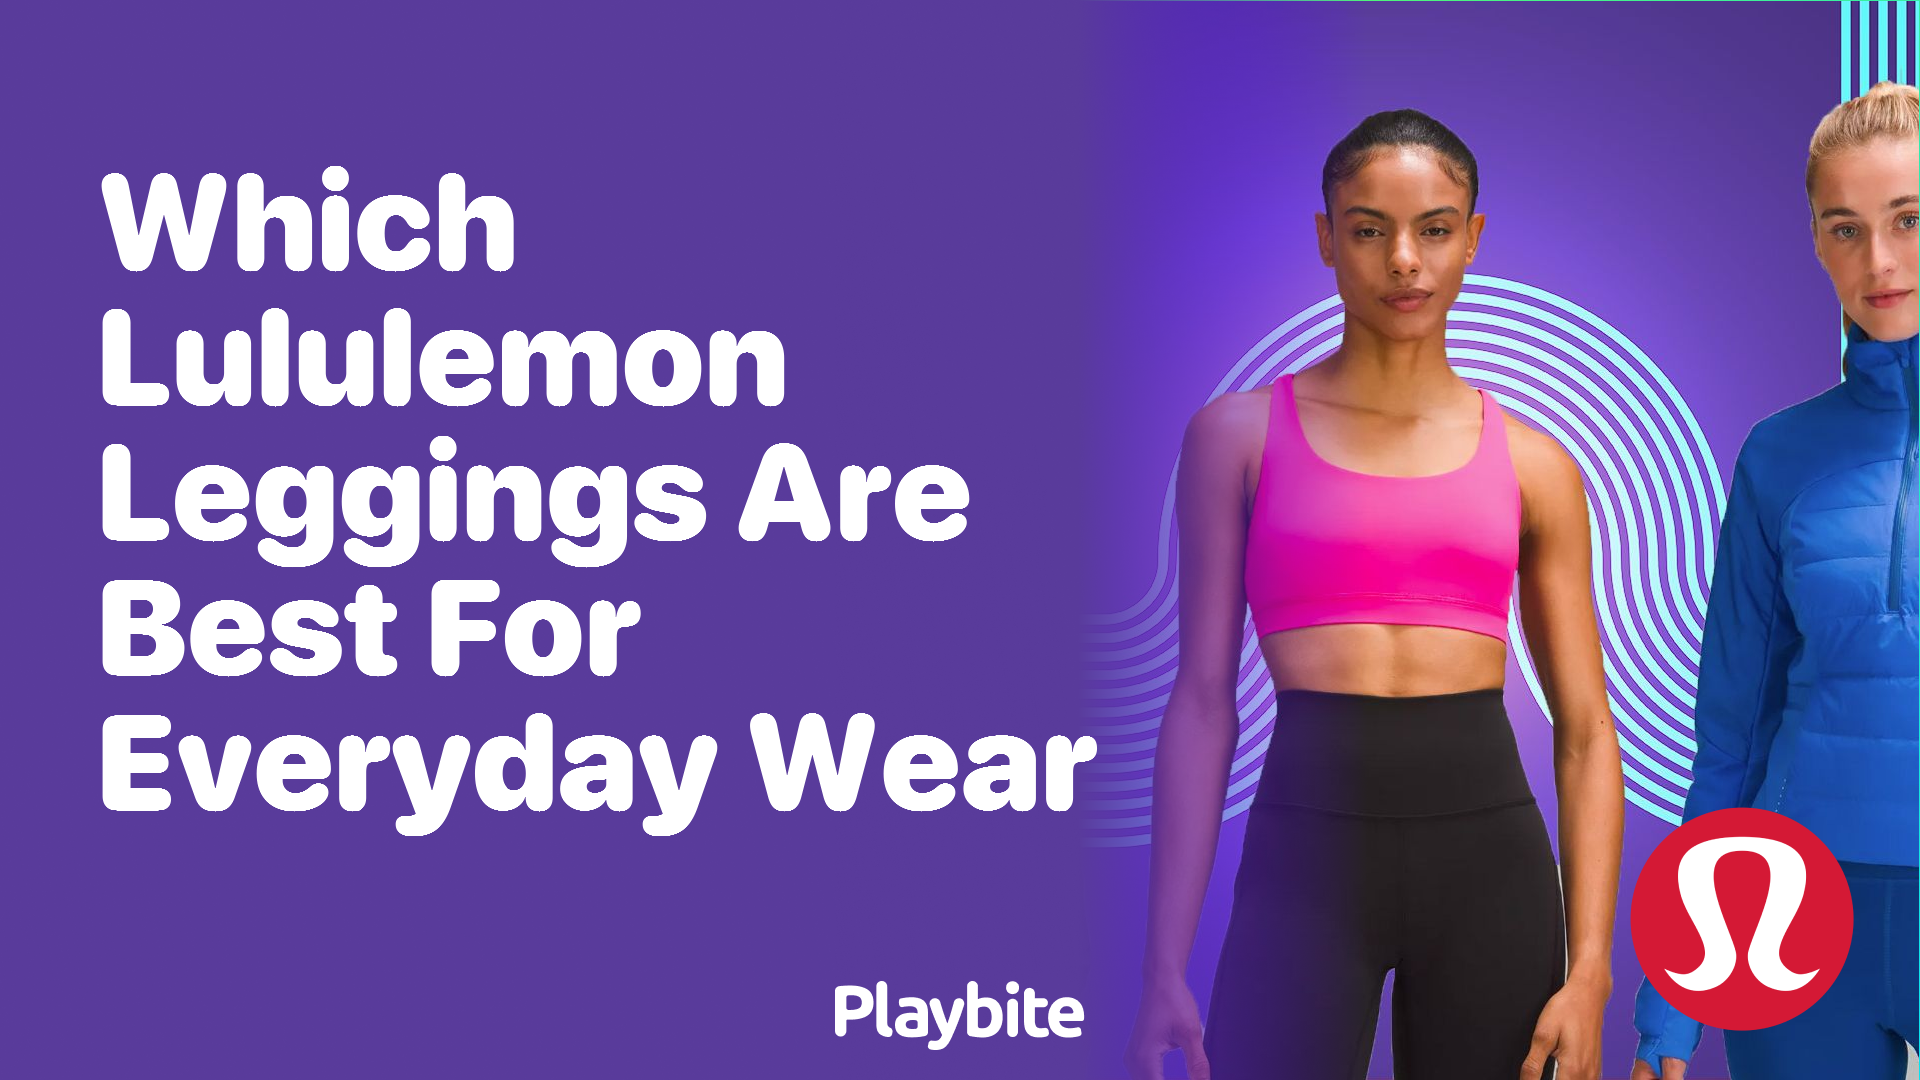 Which Lululemon Leggings Are Best for Everyday Wear? - Playbite